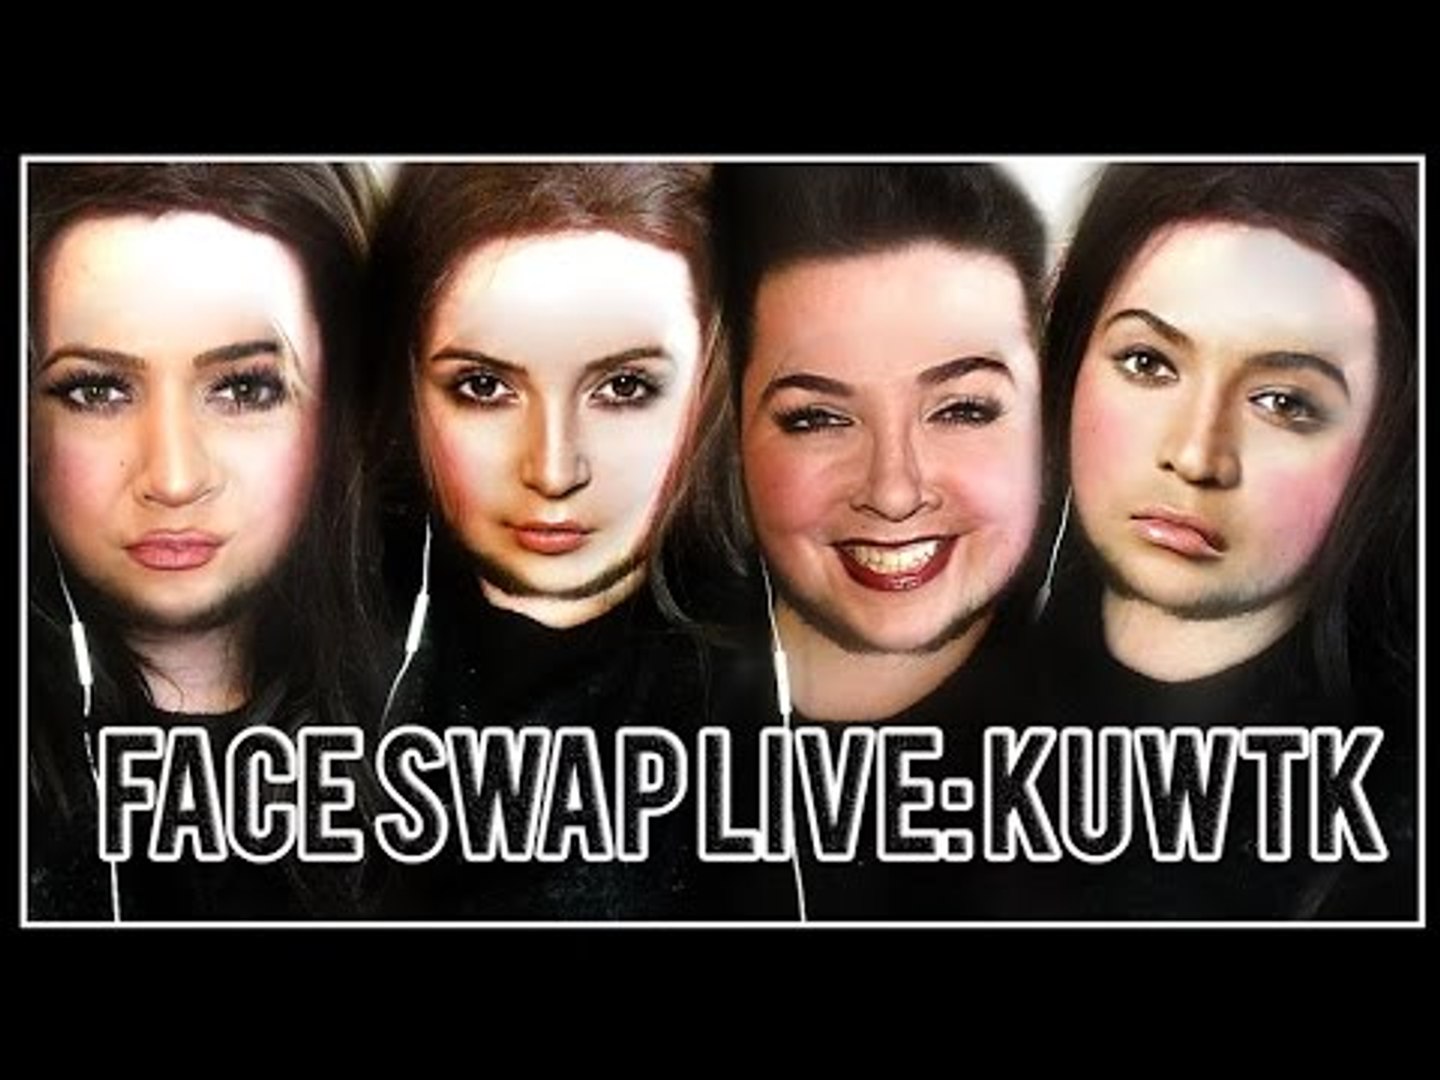 Faceswap Live Keeping Up With Kardashians Spoof Travisweiss